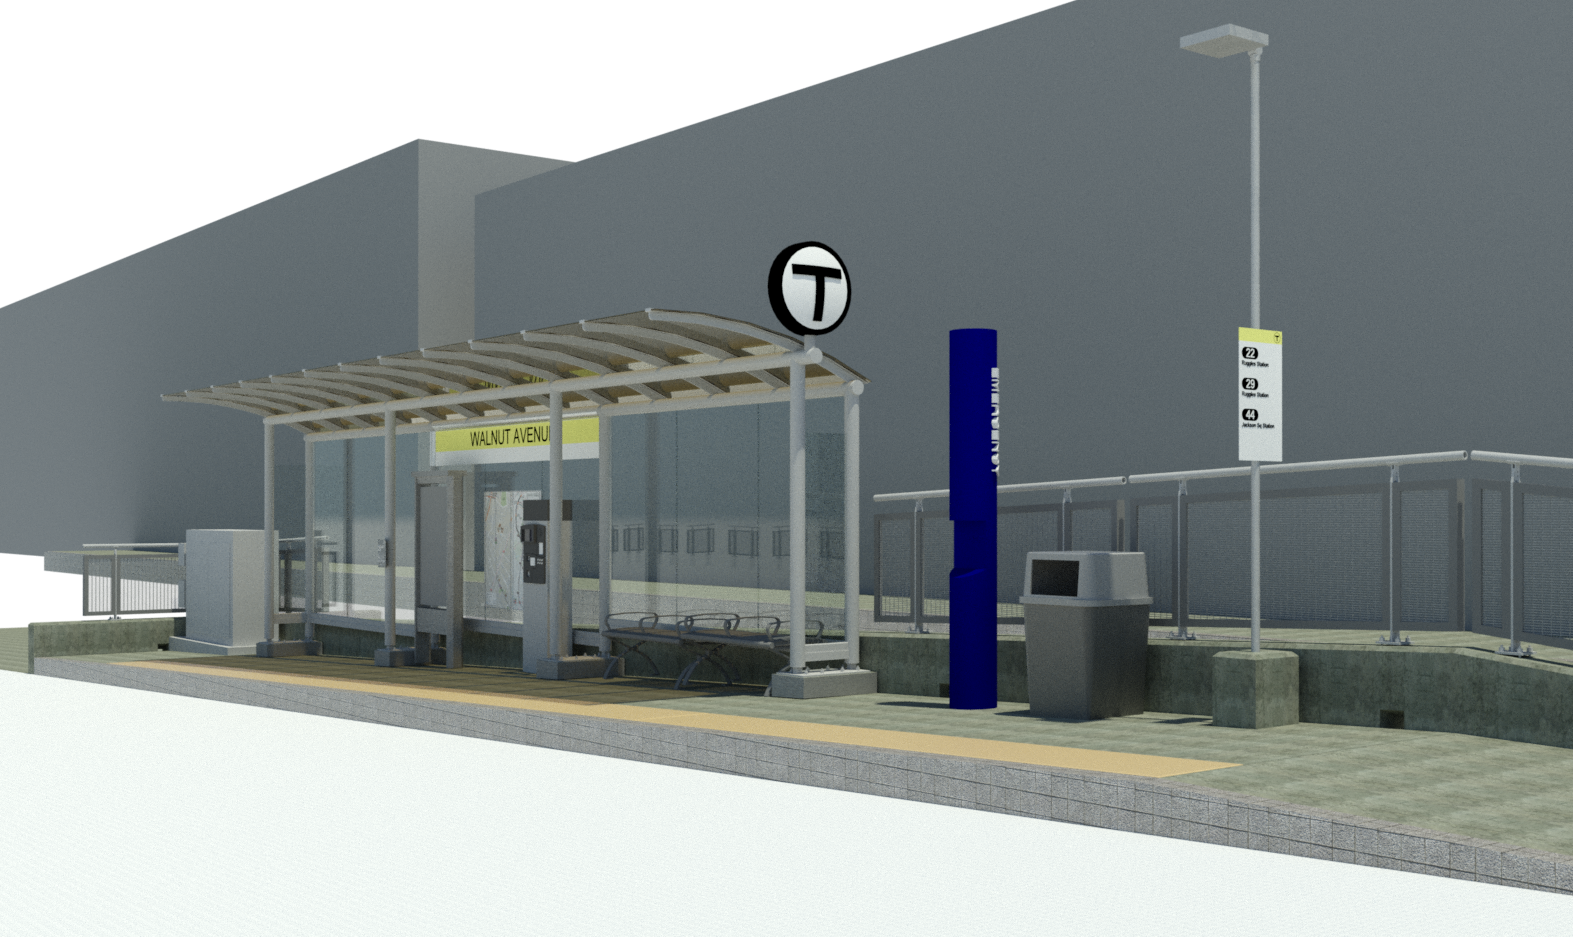 A rendering of a new bus boading platform, with a tactile strip, bus shelter, emergency call box, and lighting. Part of the Columbus Avenue bus lane project.